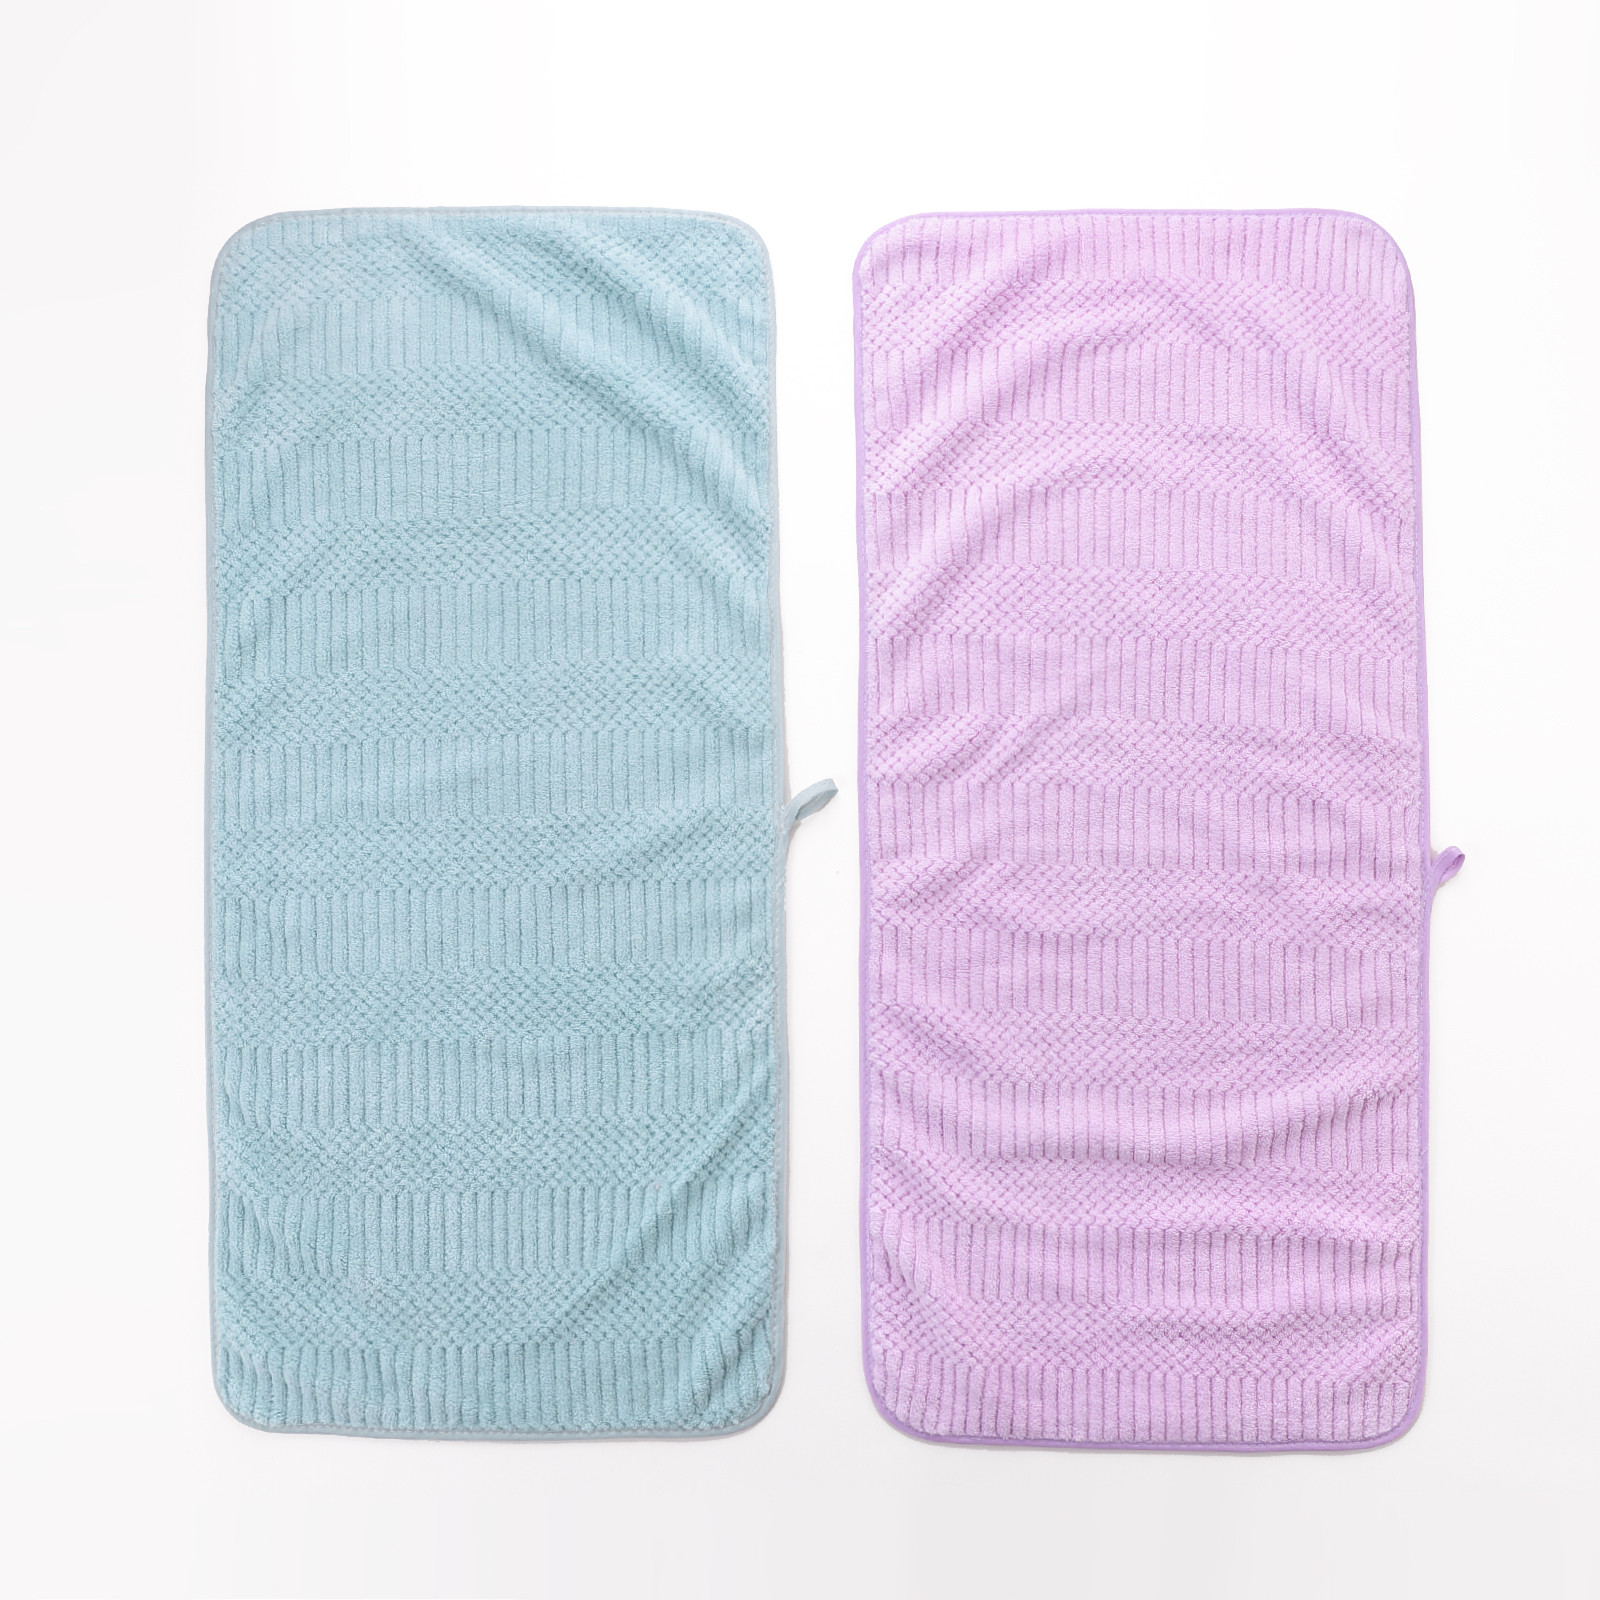 Kuber Industries 2 Piece Hand Towel Set|280 GSM|Gtm & Workout Towels|Super Absorbent & Antibacterial Treatment|Small Size, Travel Friendly  (Green & Purple)